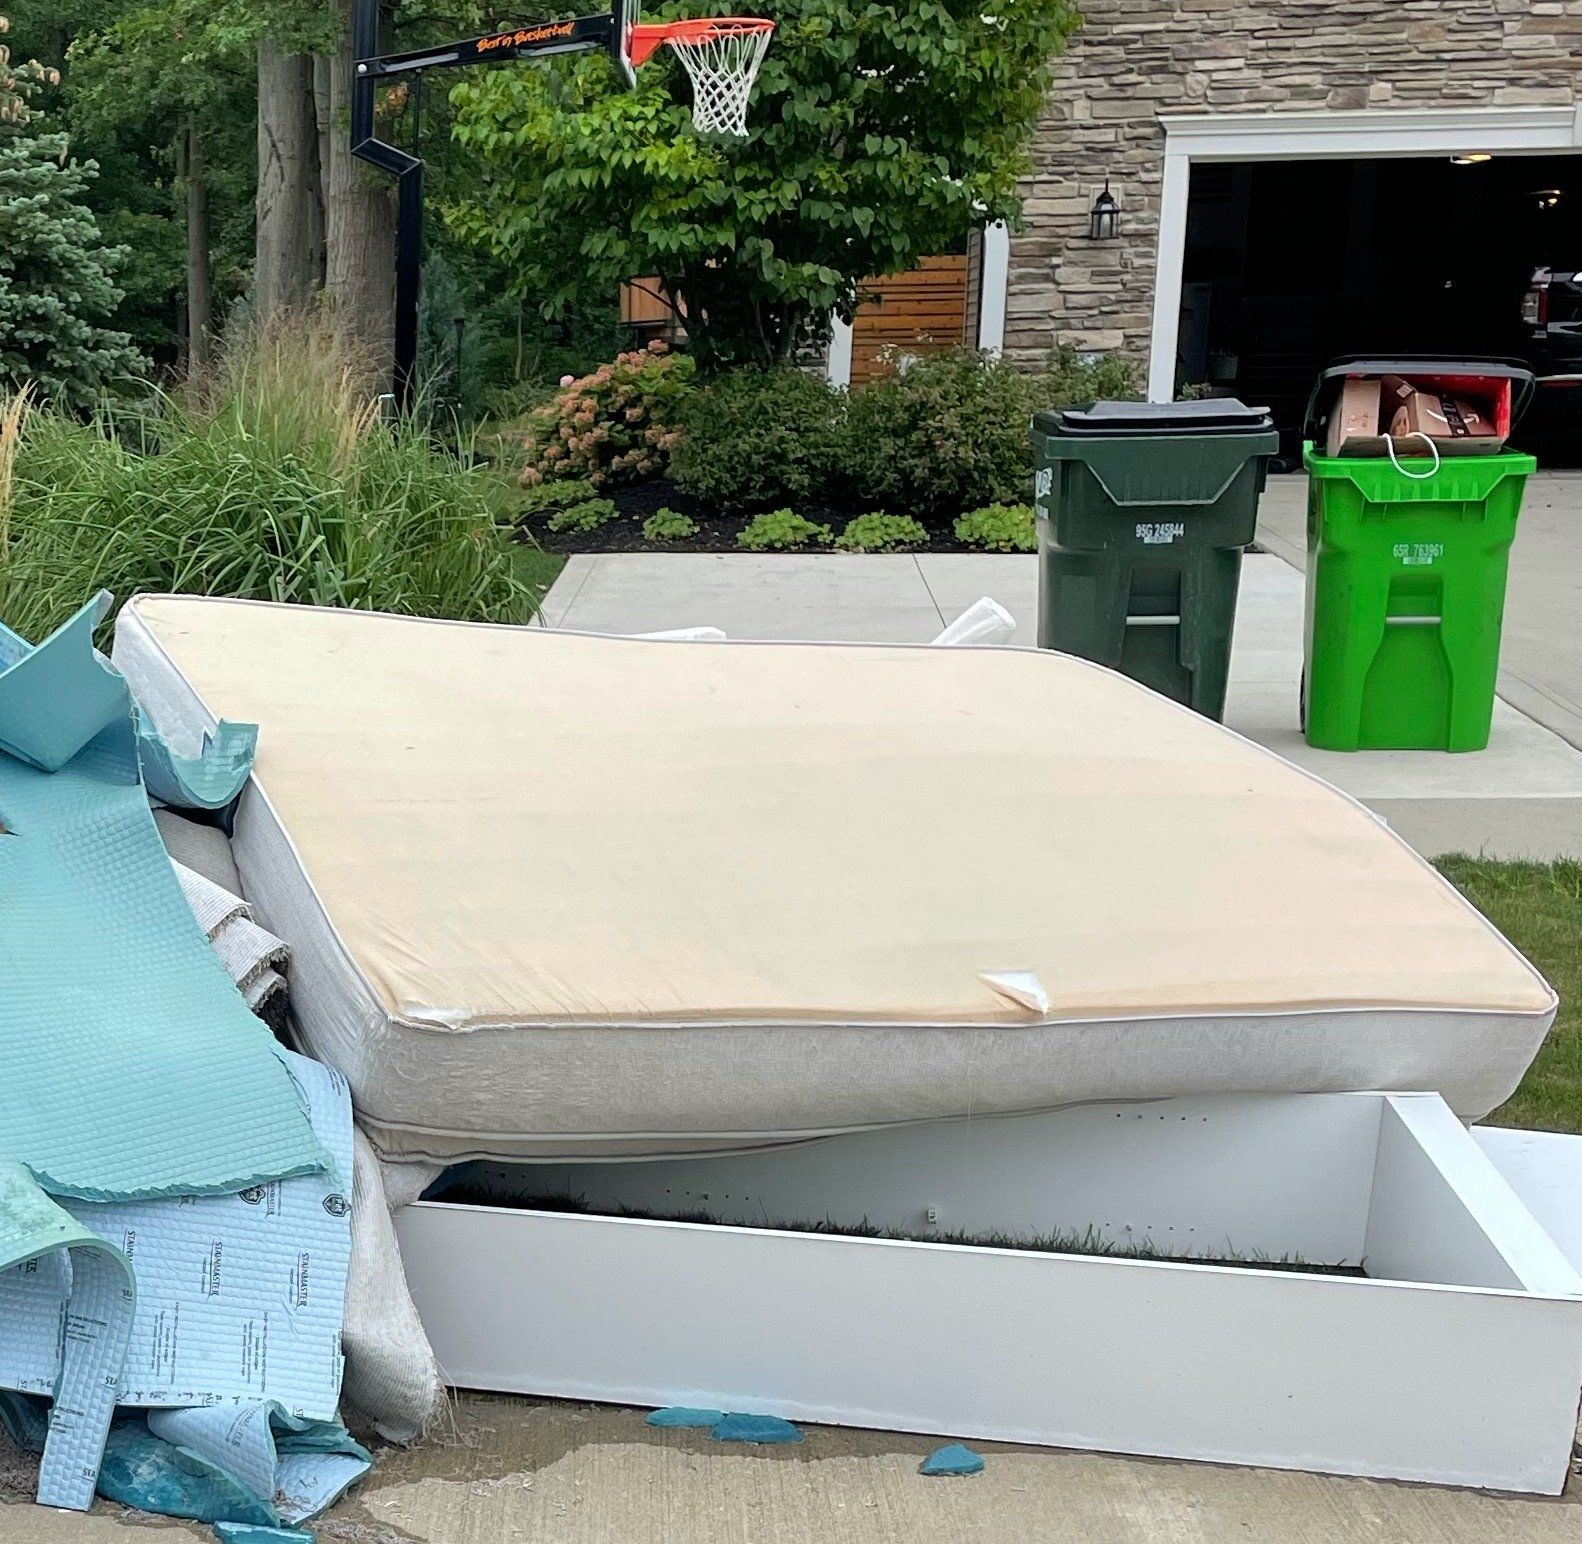 junk mattress on the curb for pickup